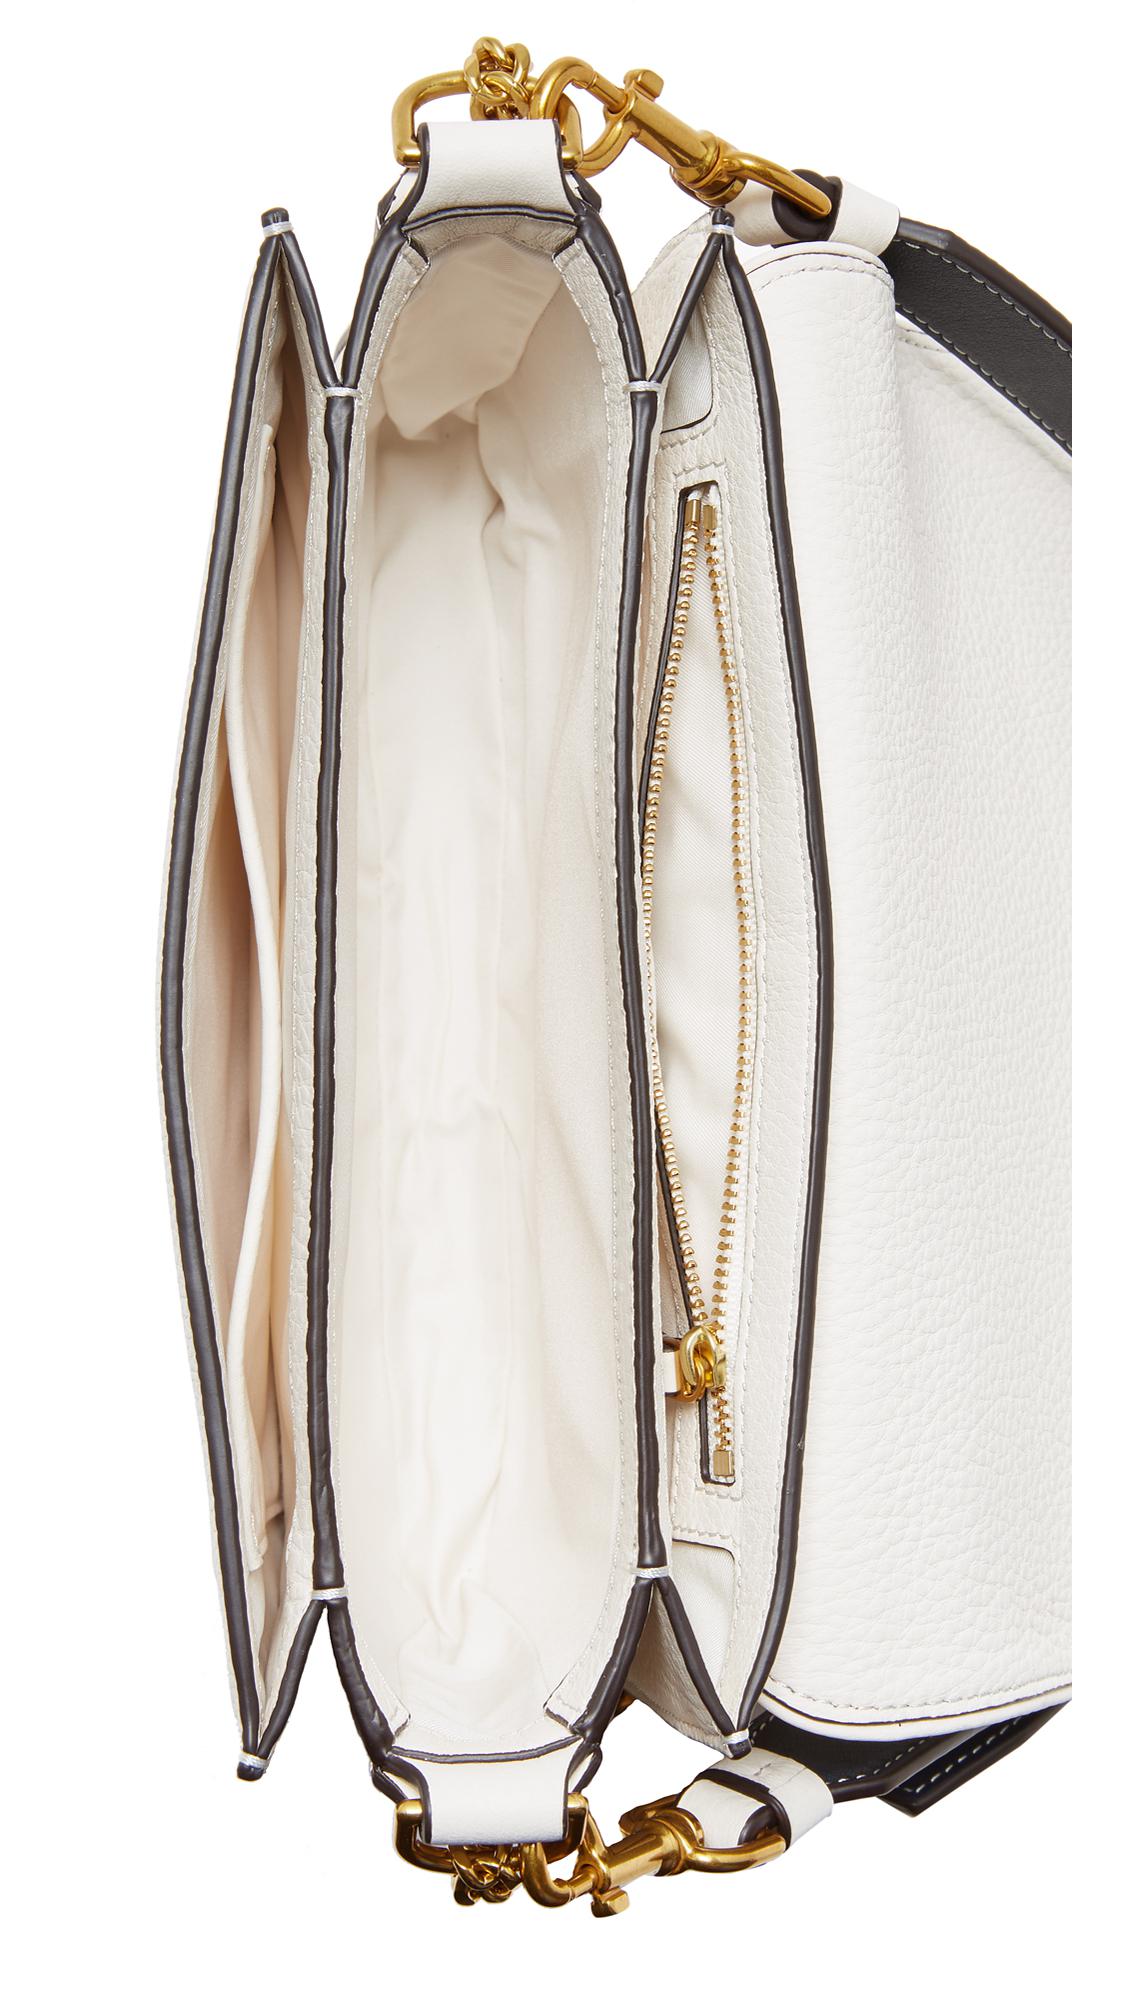 Tory Burch Leather Chelsea Convertible Shoulder Bag in Ivory 